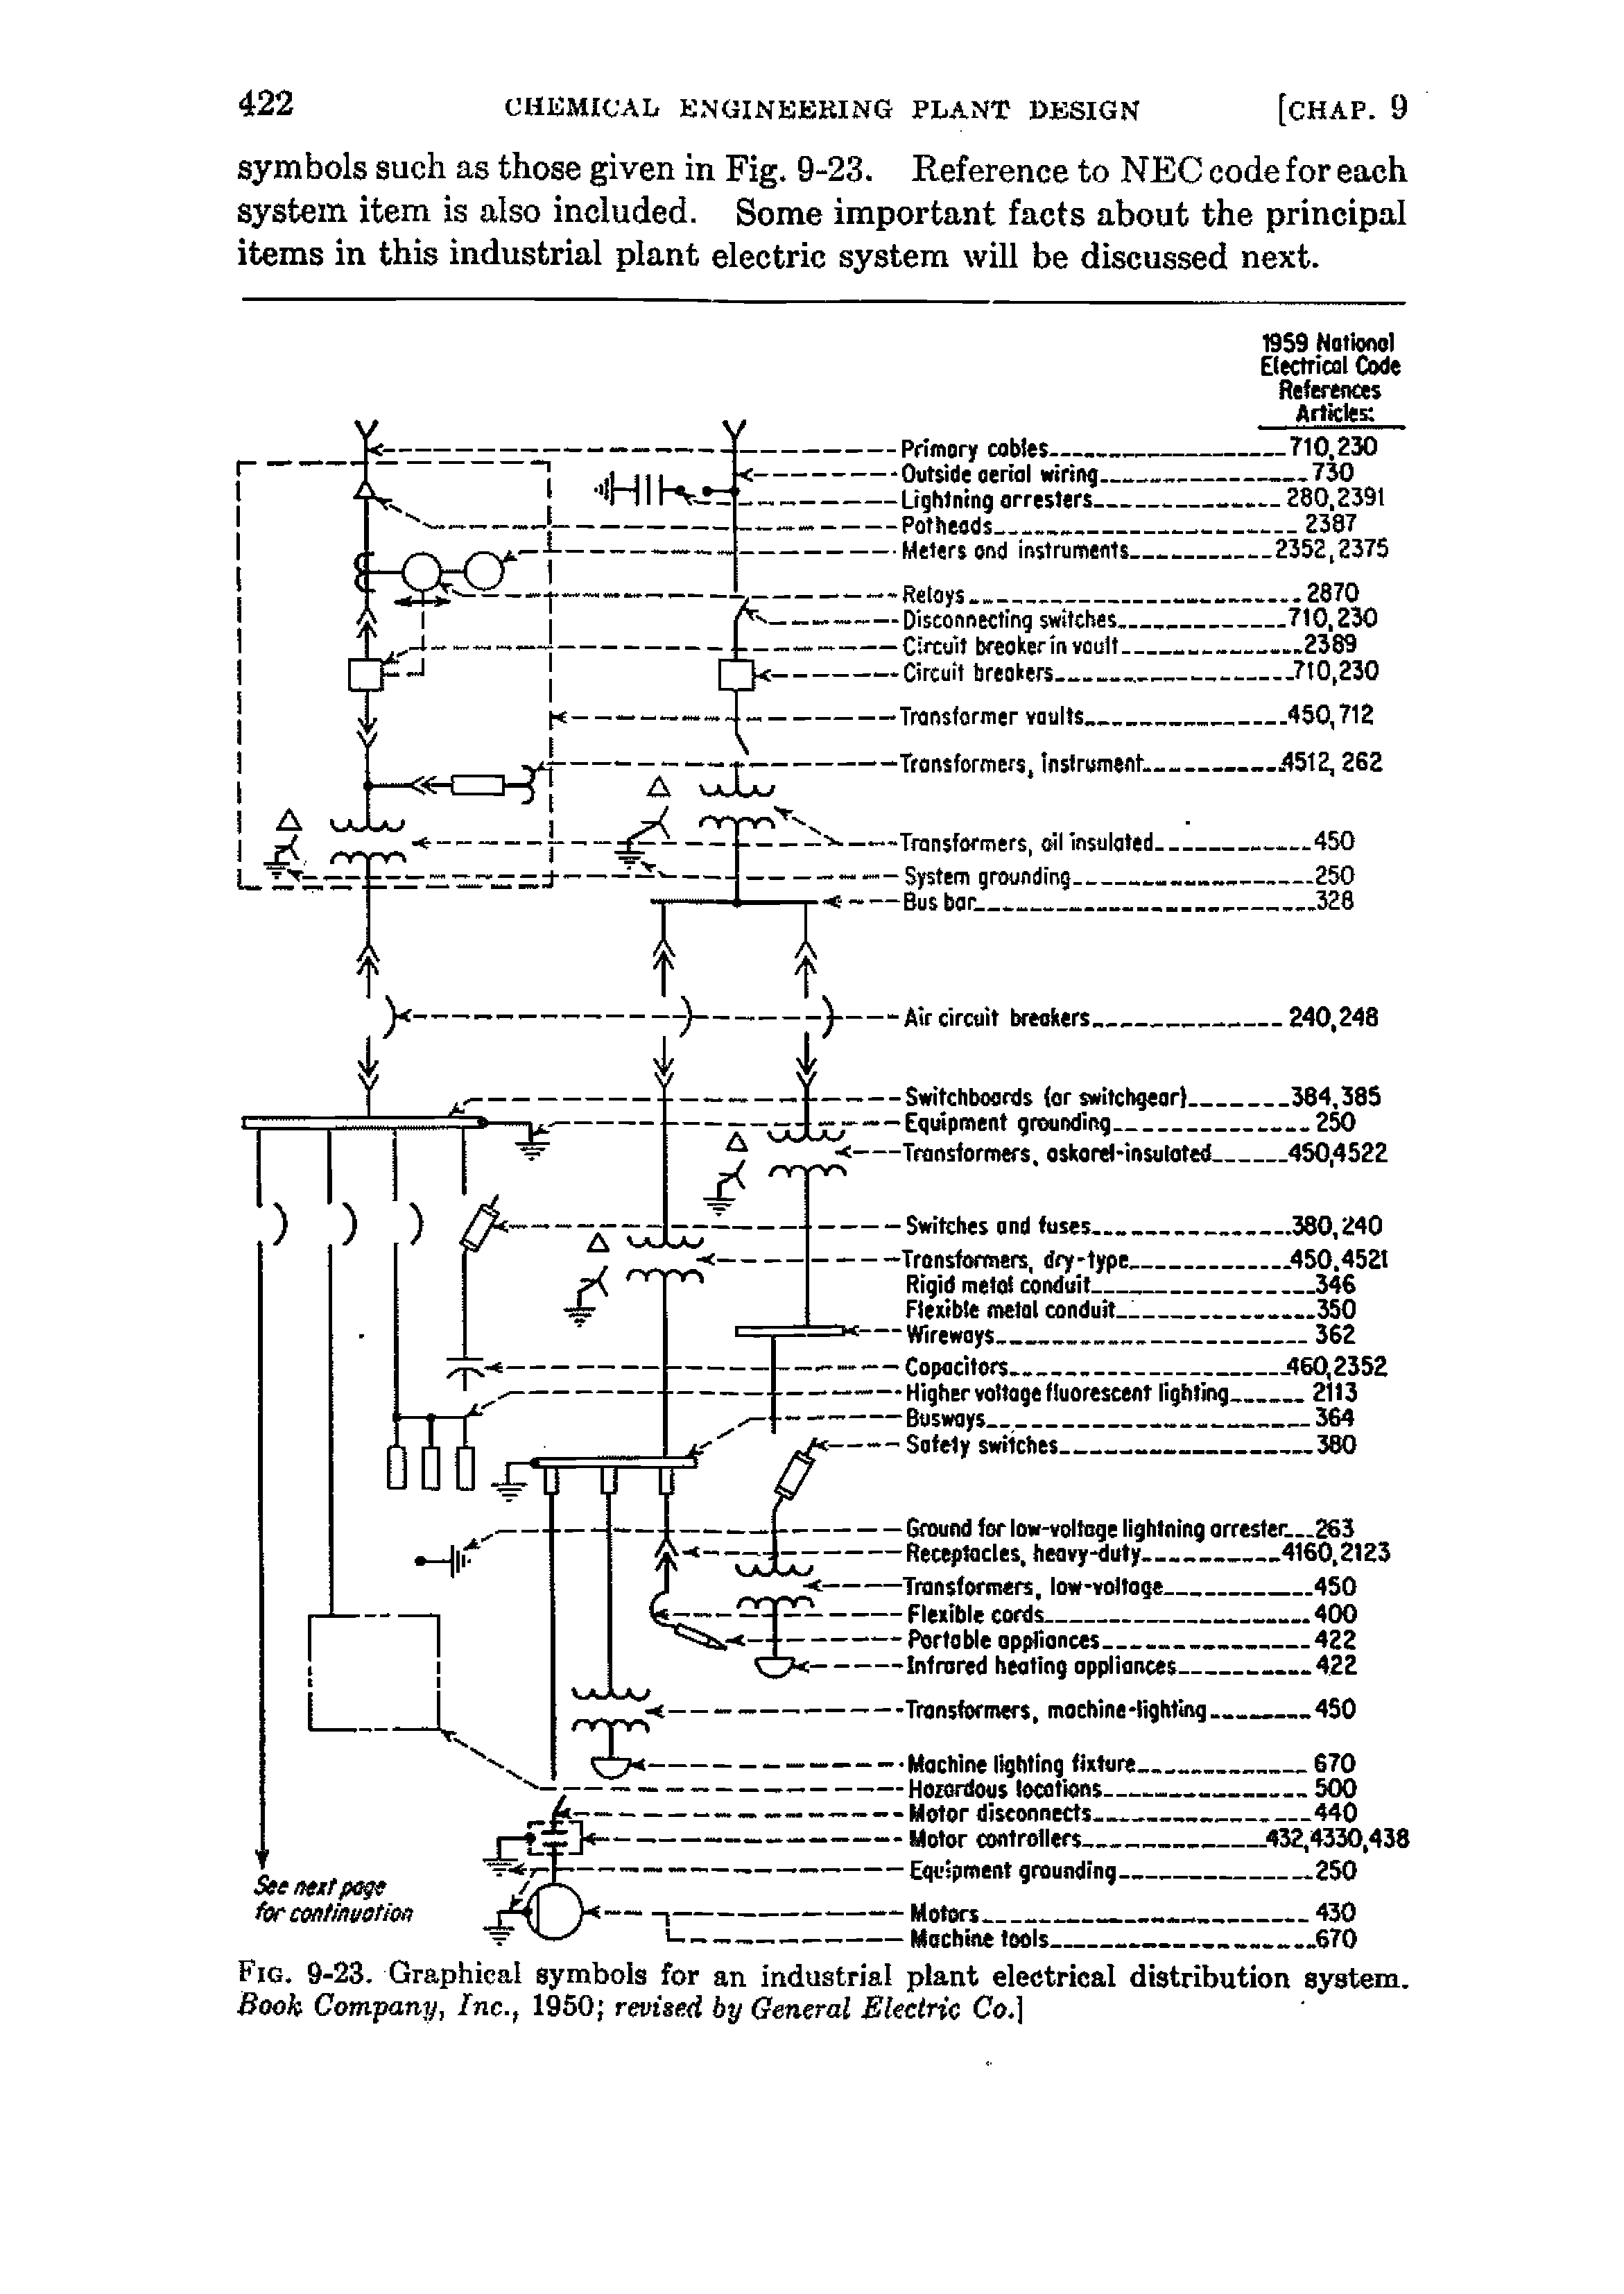 Fig. 9-23. Graphical symbols for an industrial plant electrical distribution system. Booh Company, Inc., 1950 revised by General Electric Co. ...